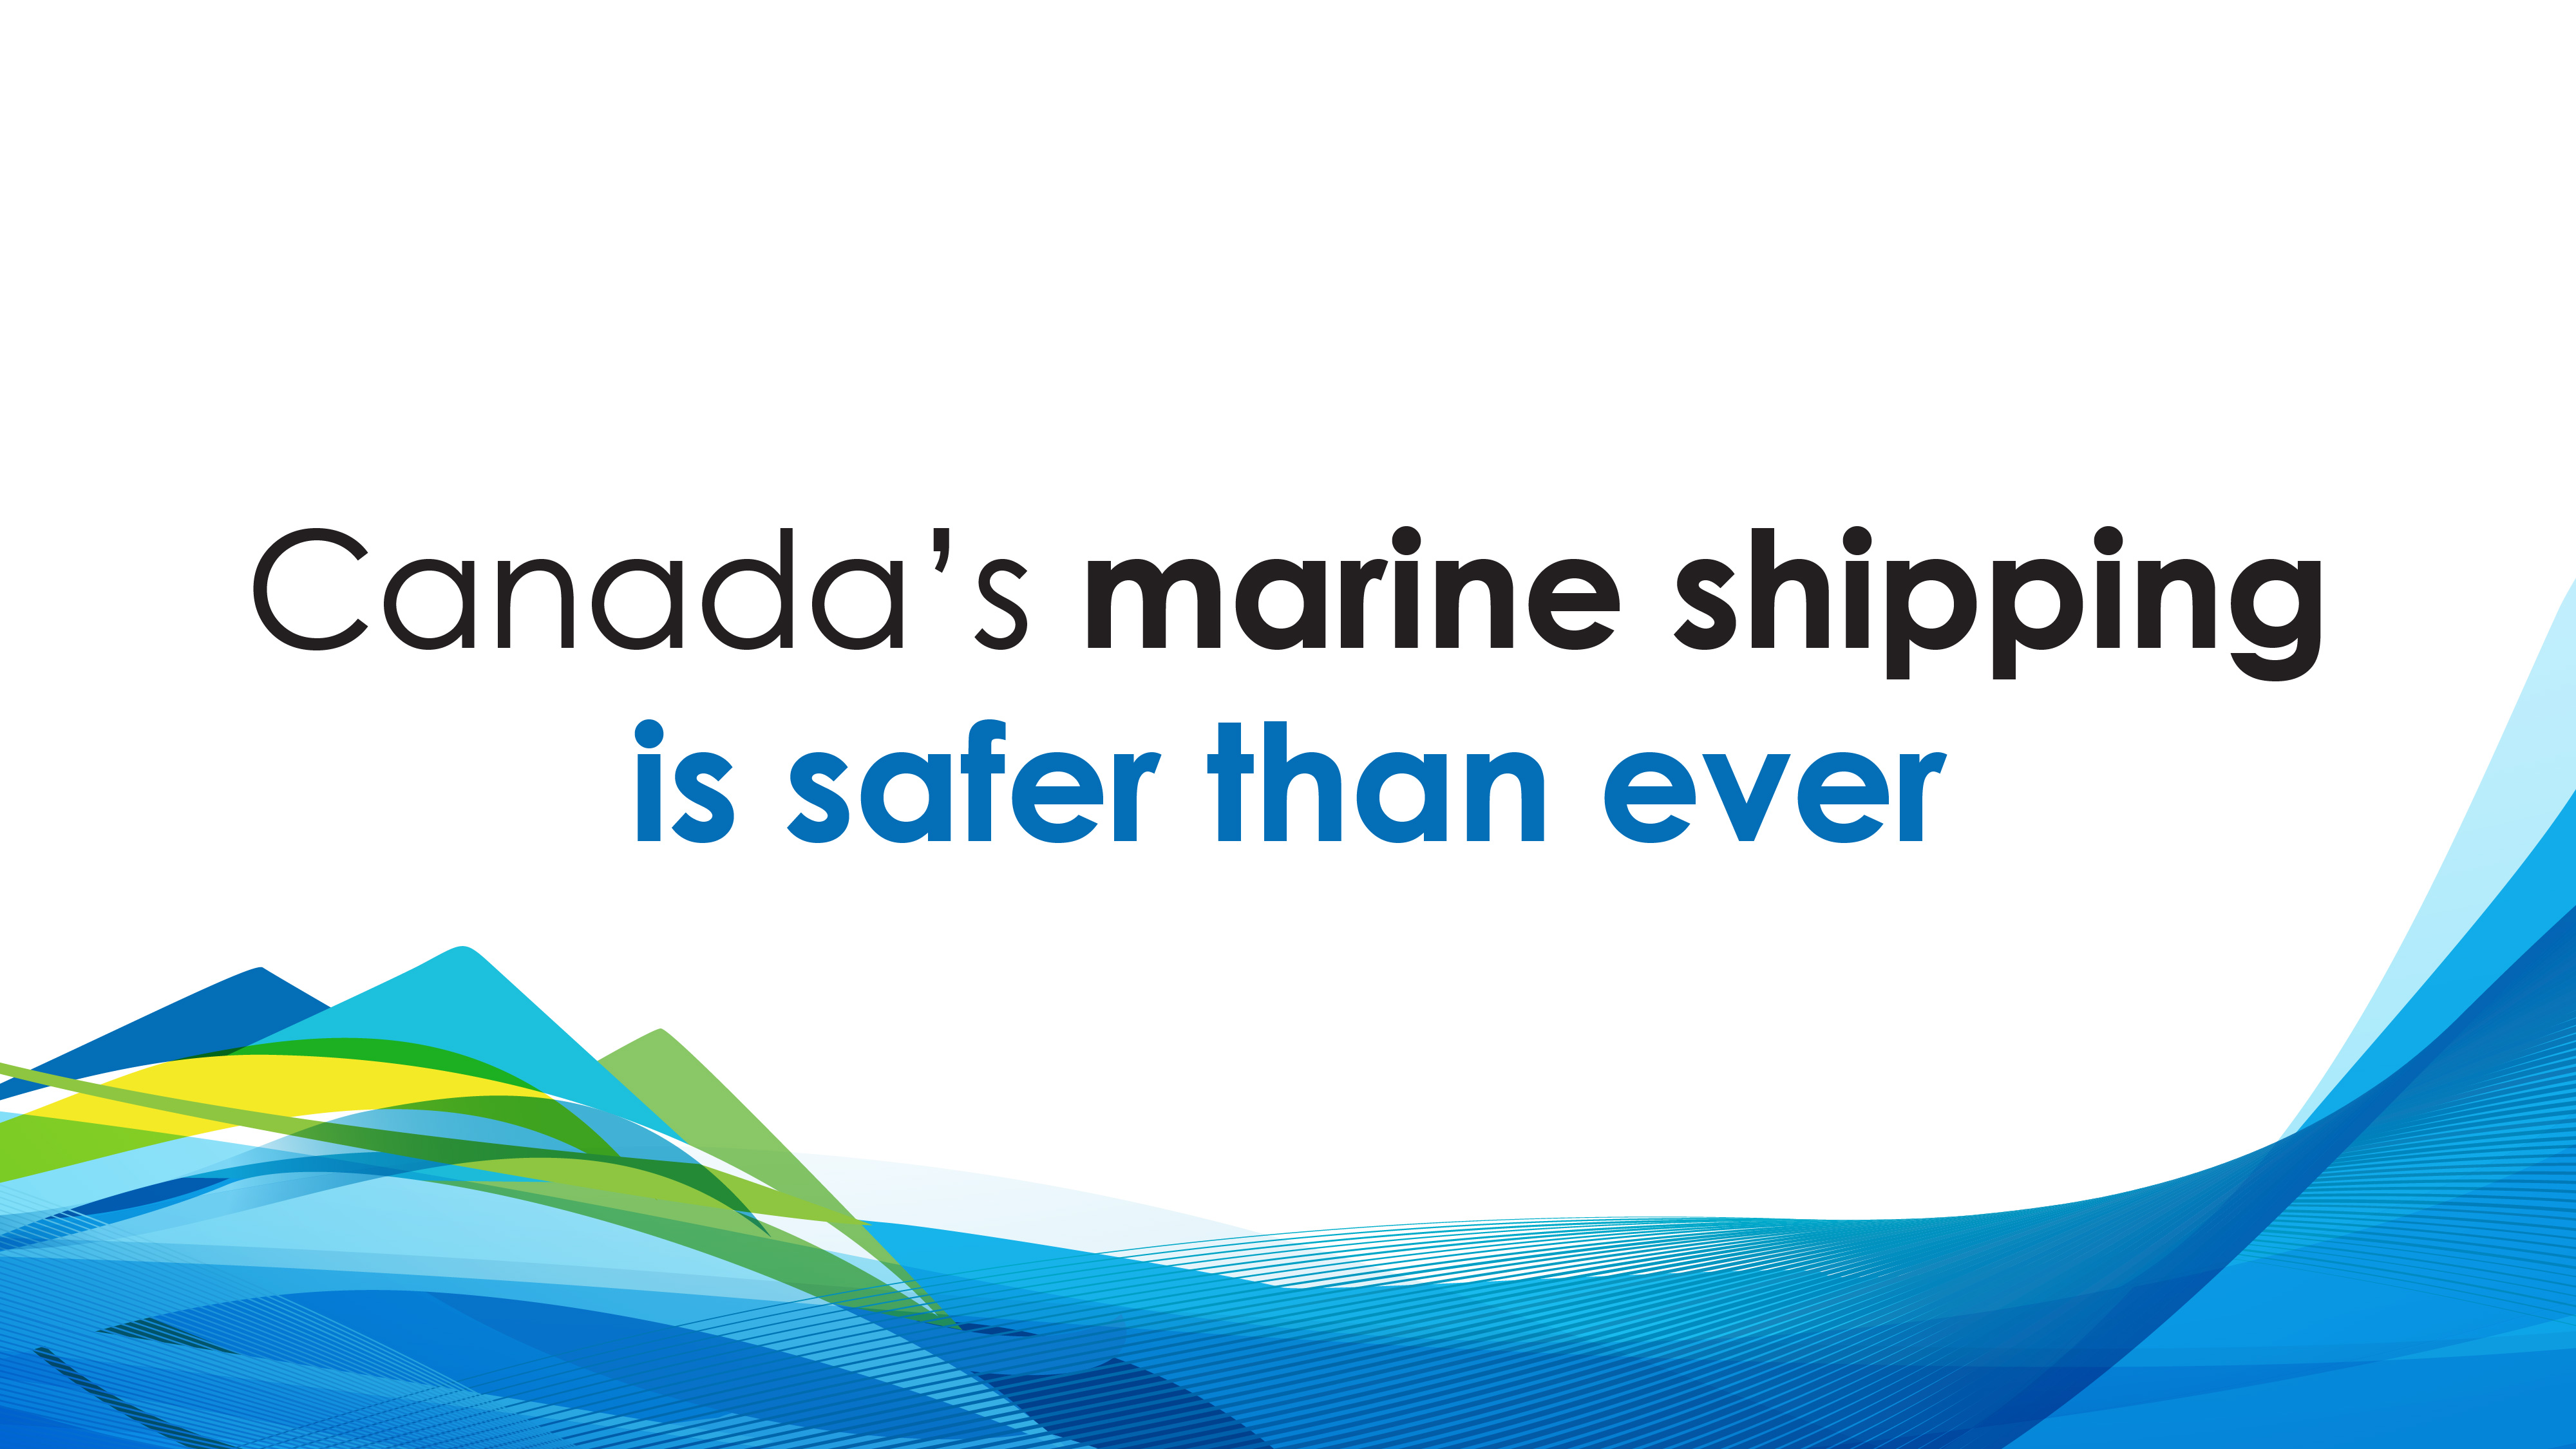 Canada’s marine shipping is safer than ever